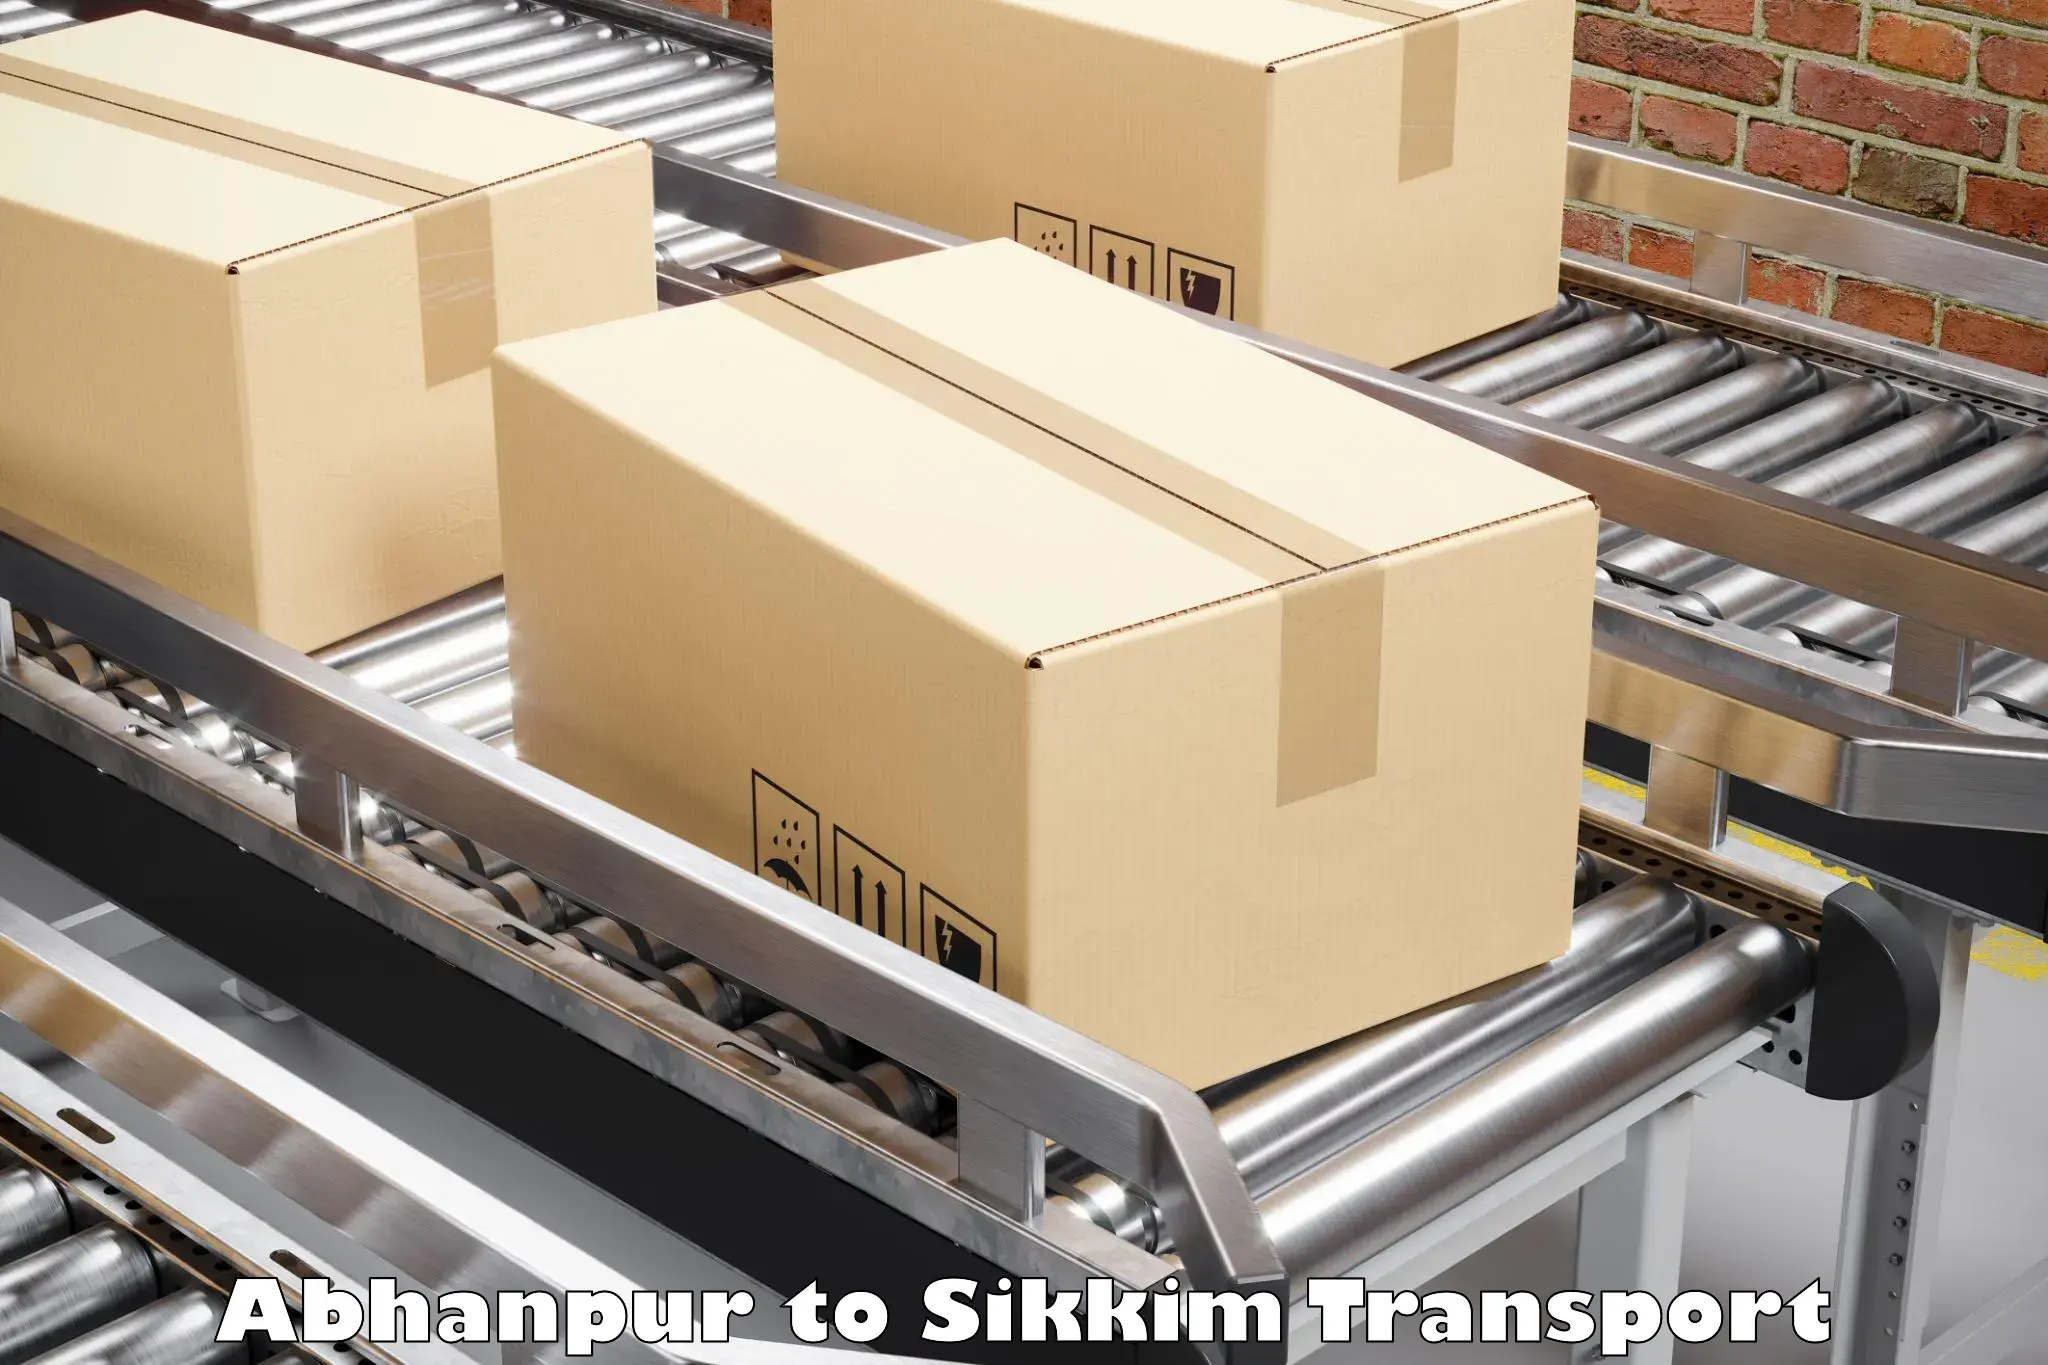 Container transport service Abhanpur to North Sikkim